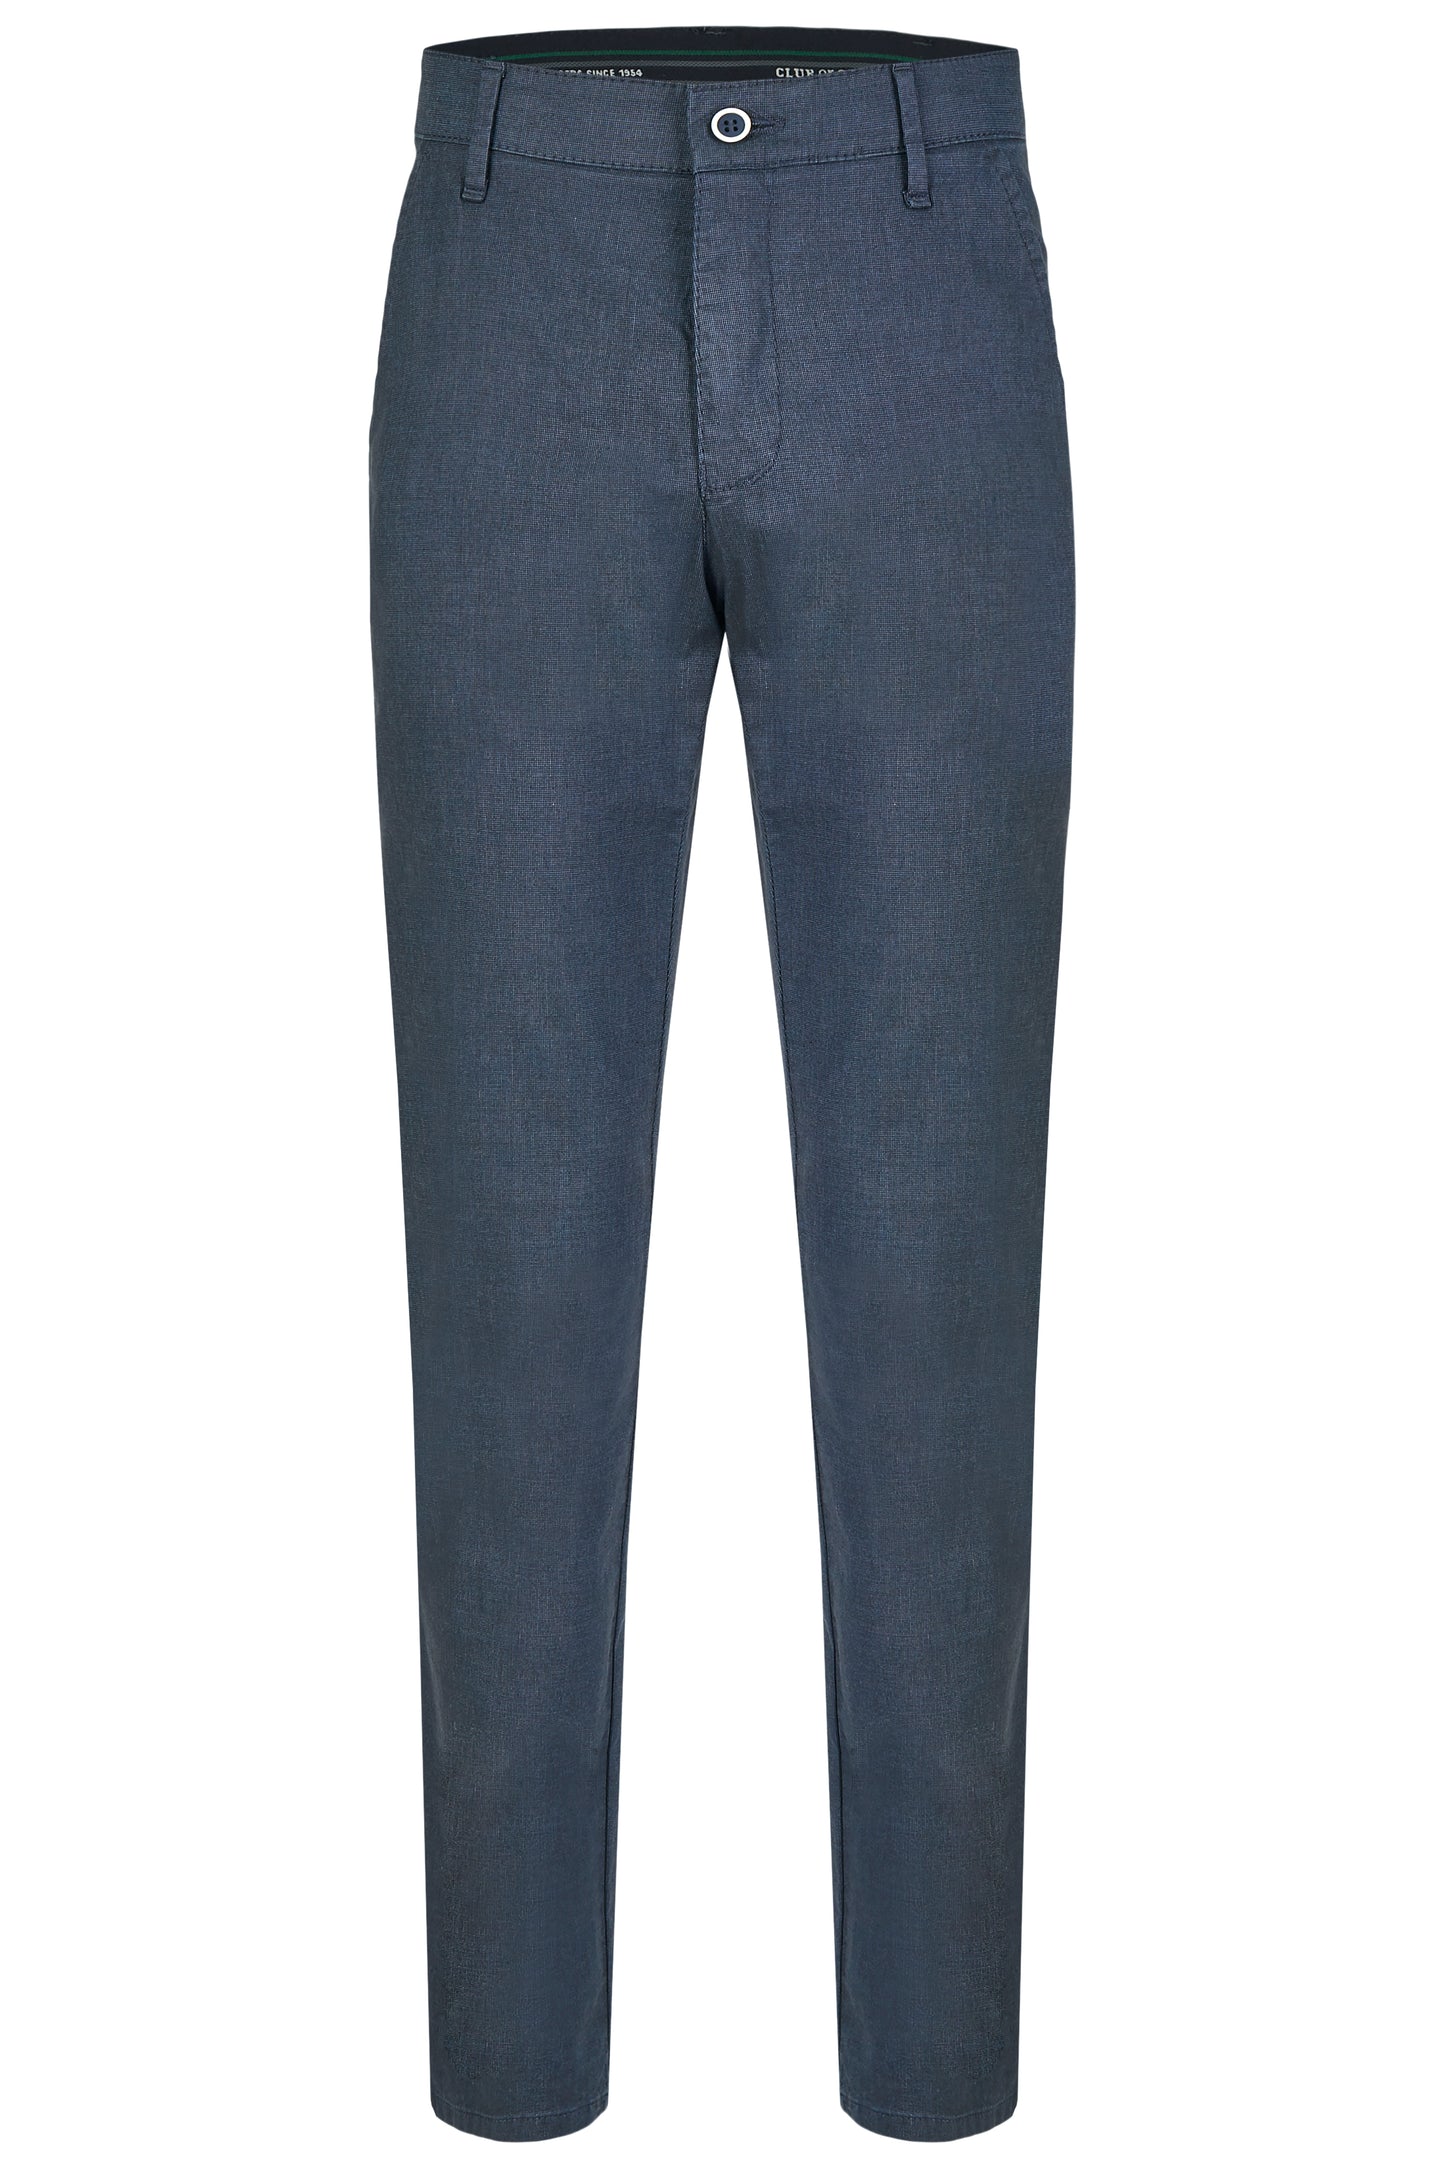 CLUB OF COMFORT Henry Chino Pant, Blue